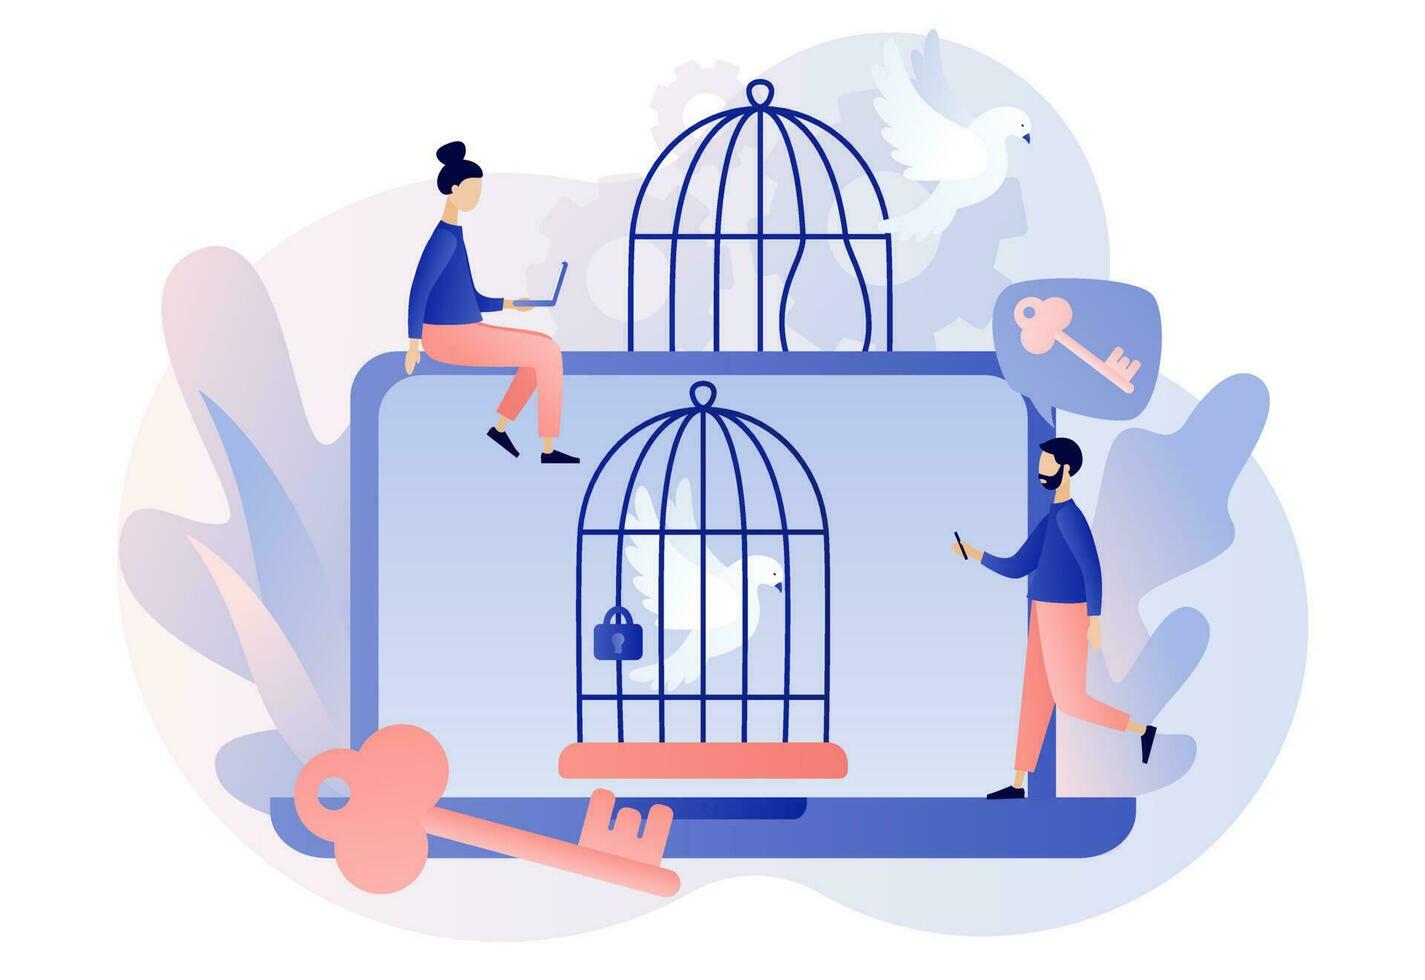 Freedom concept. Mind prison psychological. Bird fly out of cage as step out of inner prison metaphor. Comfort zone. Personal development. Modern flat cartoon style. Vector illustration